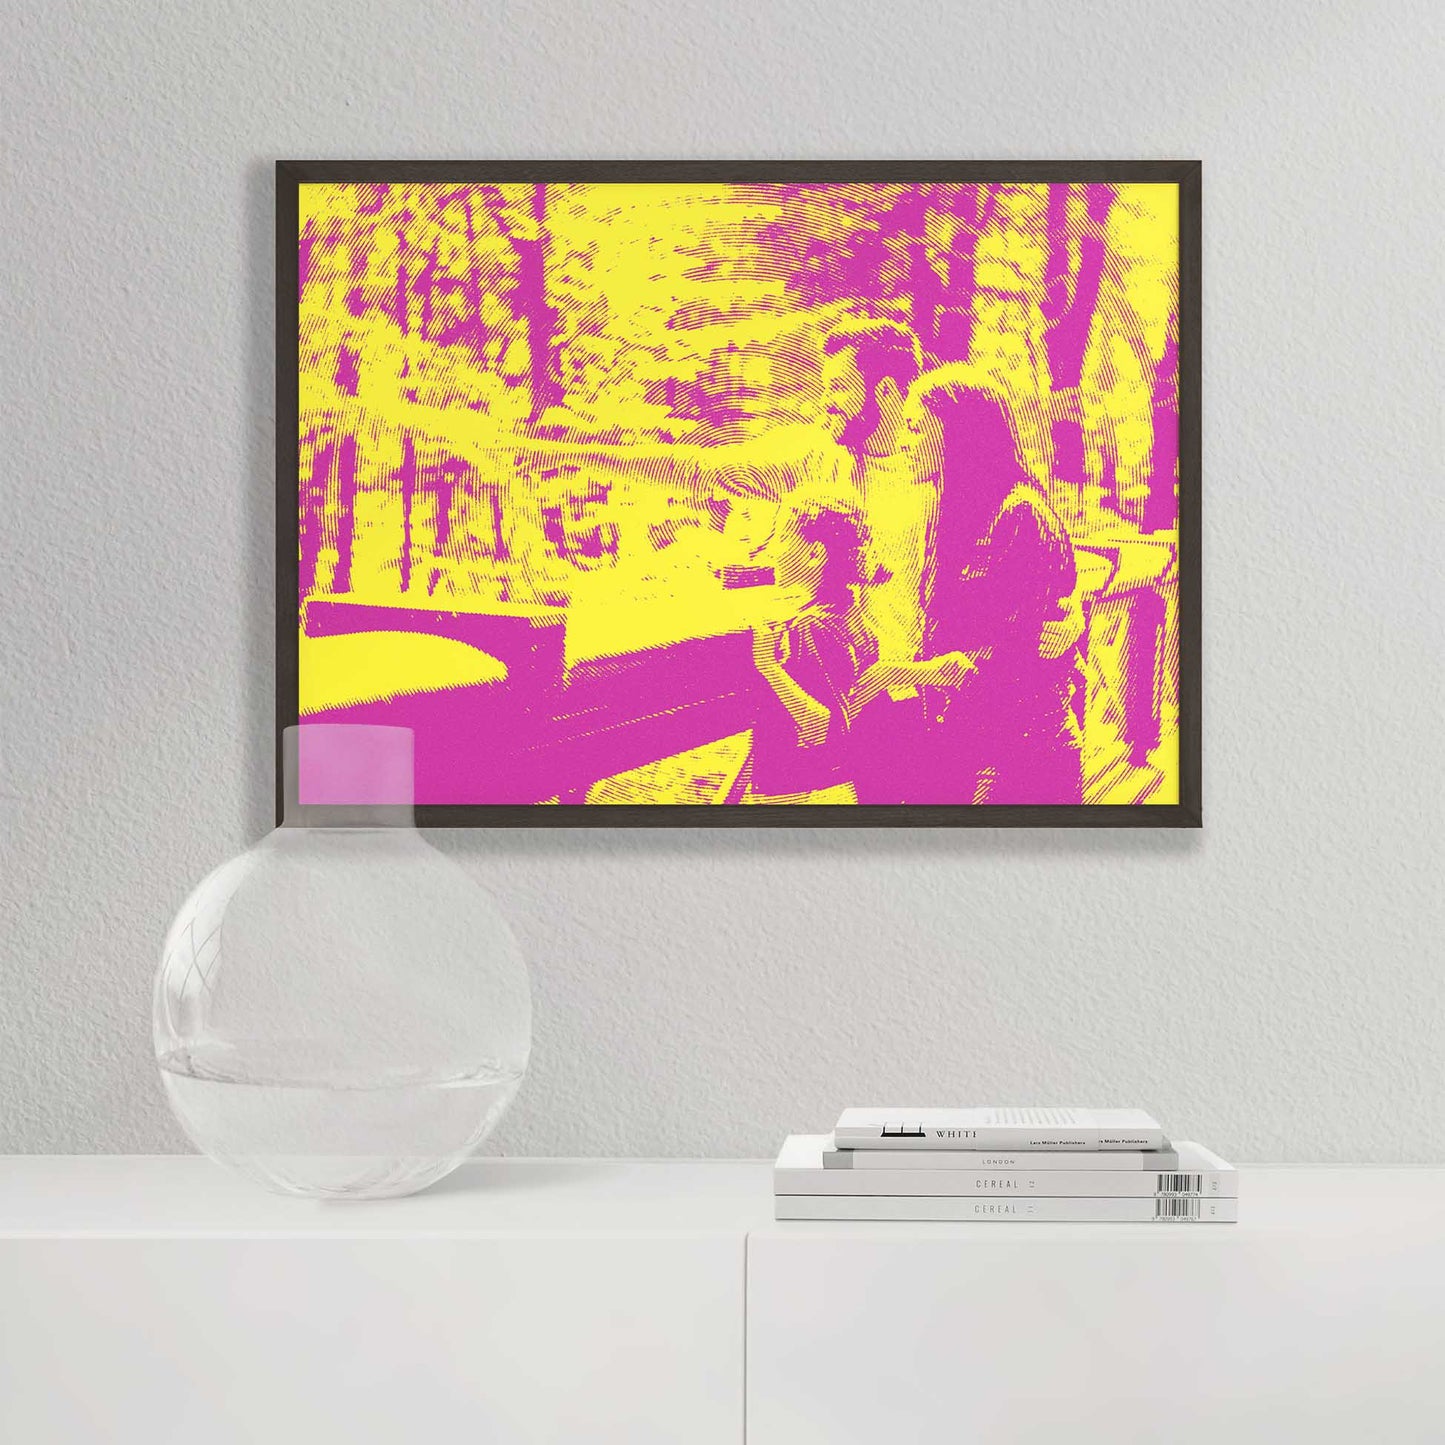 Immerse yourself in the captivating beauty of Personalised Yellow & Pink Texture Framed Print. Its fun and vibrant colors bring a burst of energy and joy, evoking laughter and smiles. Crafted from your photo, chic and cool artwork 